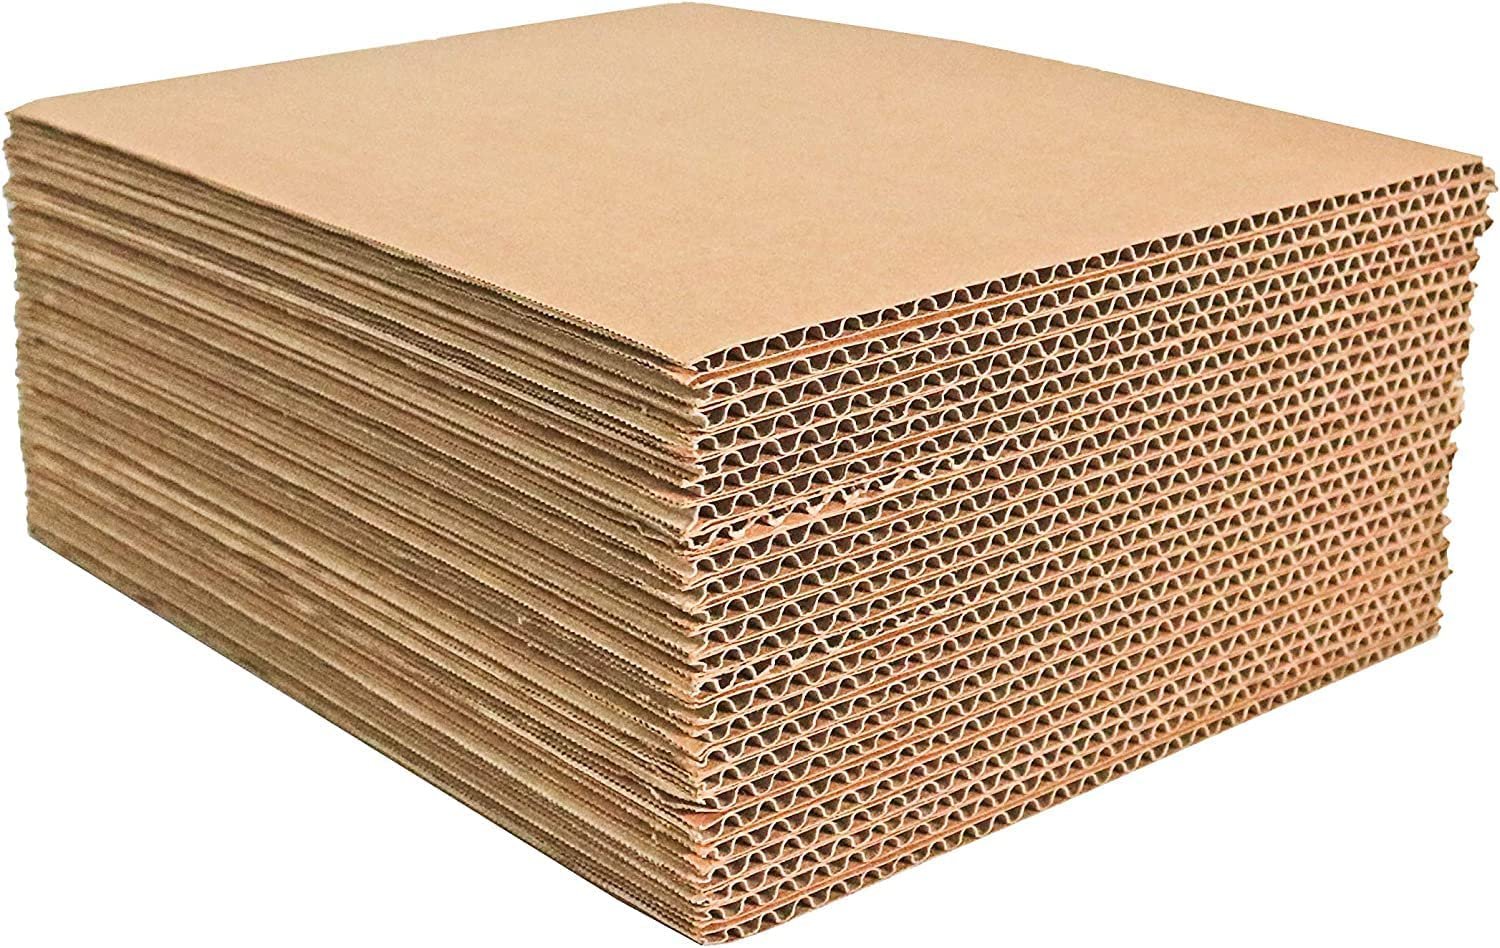  zmybcpack 50 Pack White Corrugated Cardboard Sheets 9x12 inch, Corrugated  Cardboard Filler Insert Sheet Pads for Packing, Mailing, Crafts : Office  Products